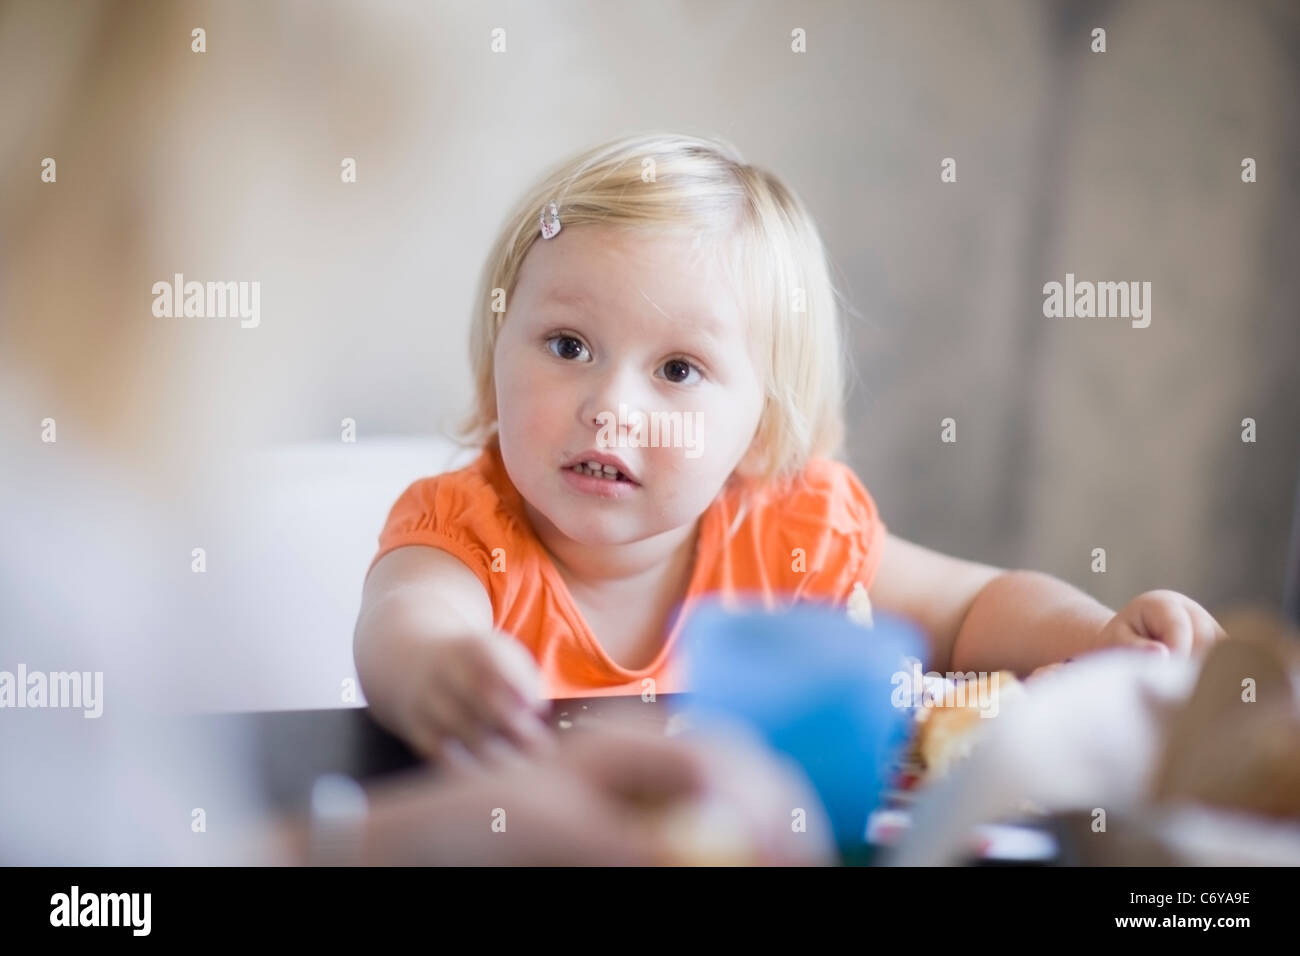 Girl eating at dinner table Banque D'Images